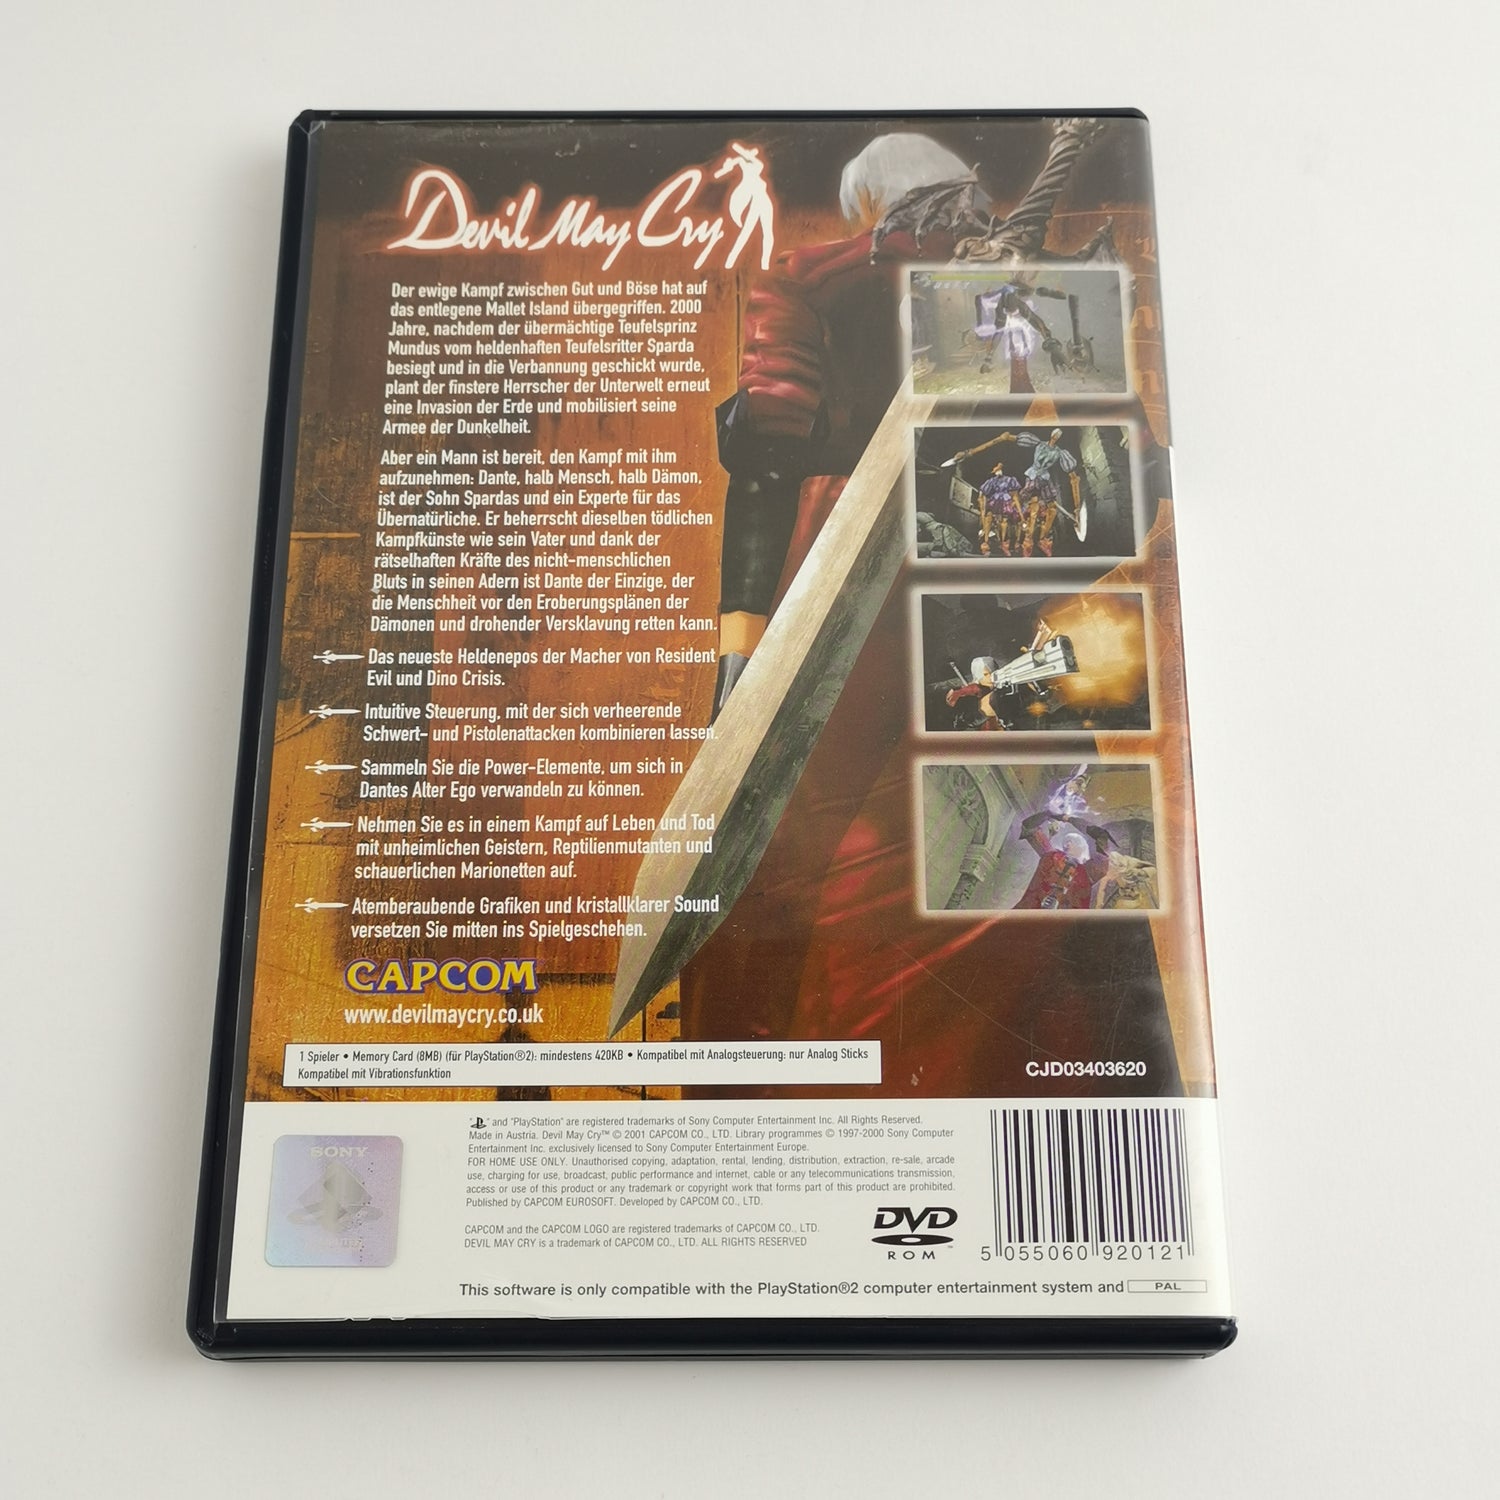 Sony Playstation 2 Game: Devil May Cry + GamePress Game Solution | PS2 OVP PAL